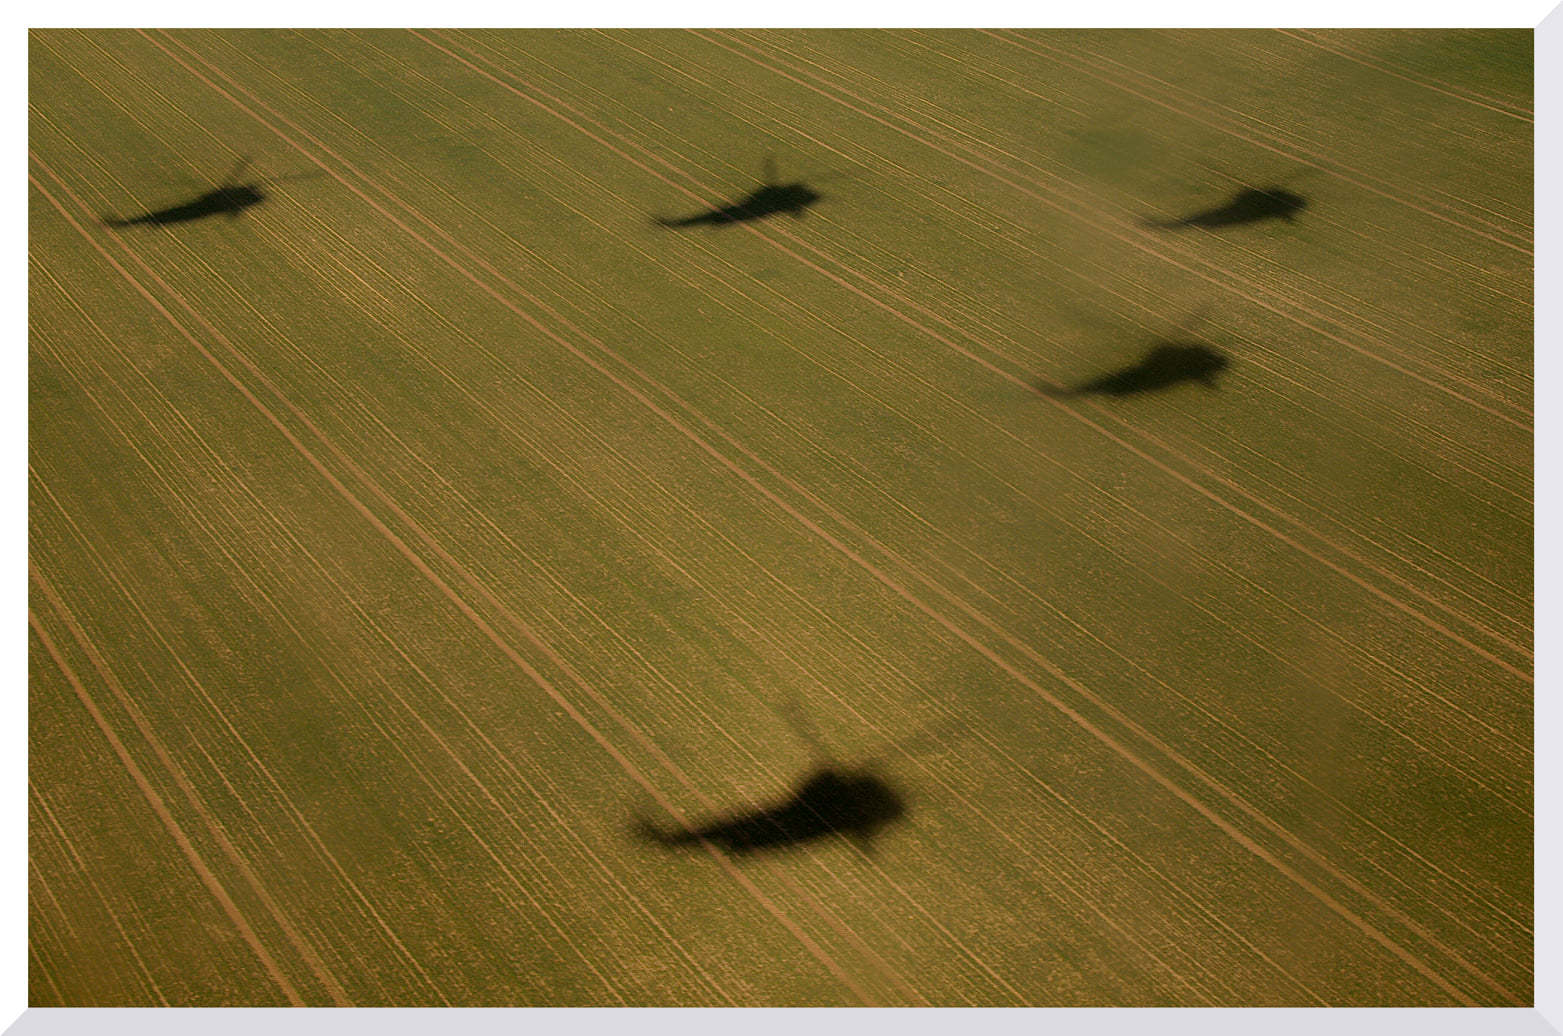 JANUARY - Naval Air Squadron fly over the Wiltshire fields as part of Farewell Flypast in March, 2016. By Robin Trewinnard-Boyle